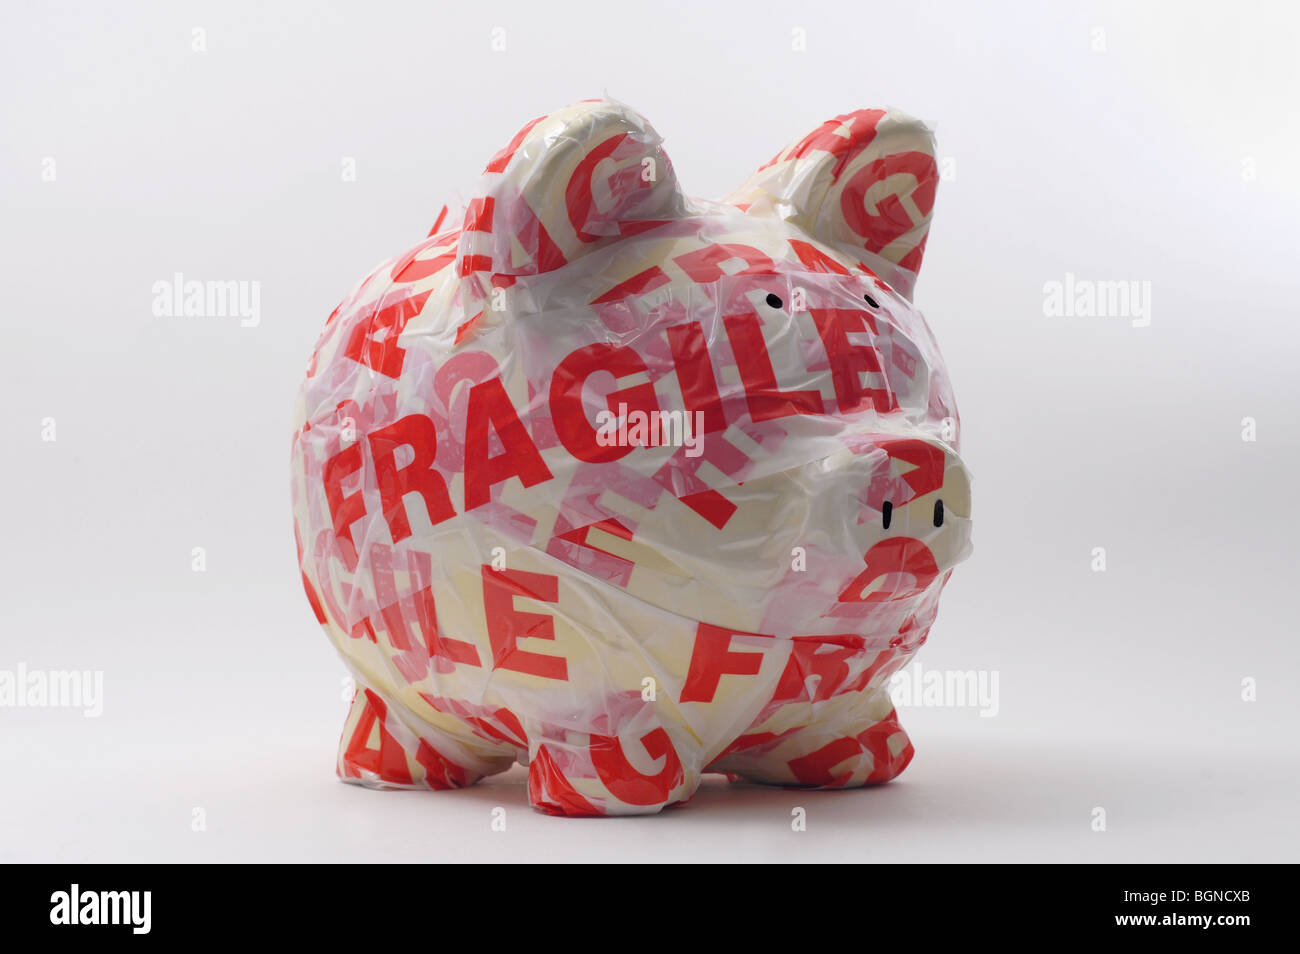 PIGGY BANK WRAPPED IN FRAGILE WARNING TAPE RE SAVINGS/INVESTMENTS/MONEY/CASH THE ECONOMY CASH MONEY HOUSEHOLD BUDGETS UK Stock Photo